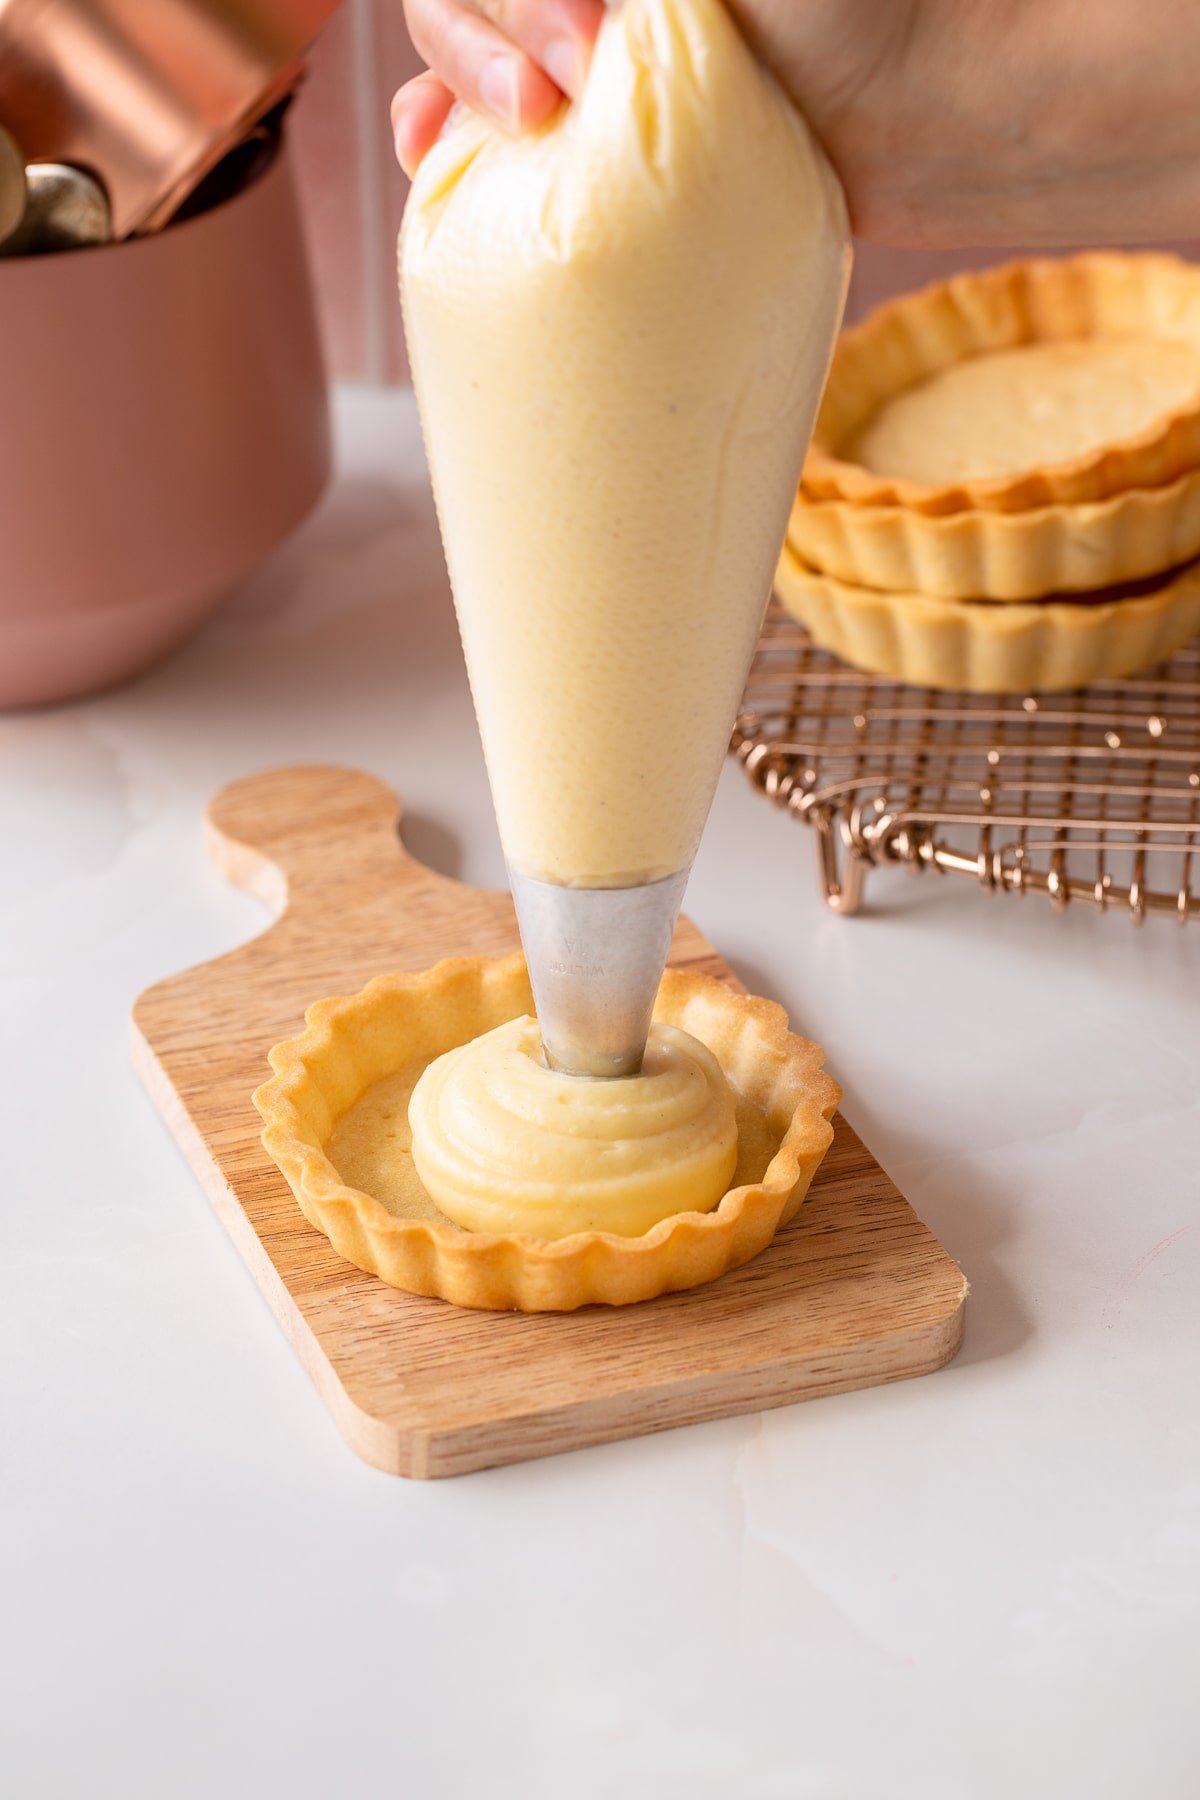 piping pastry cream into tart